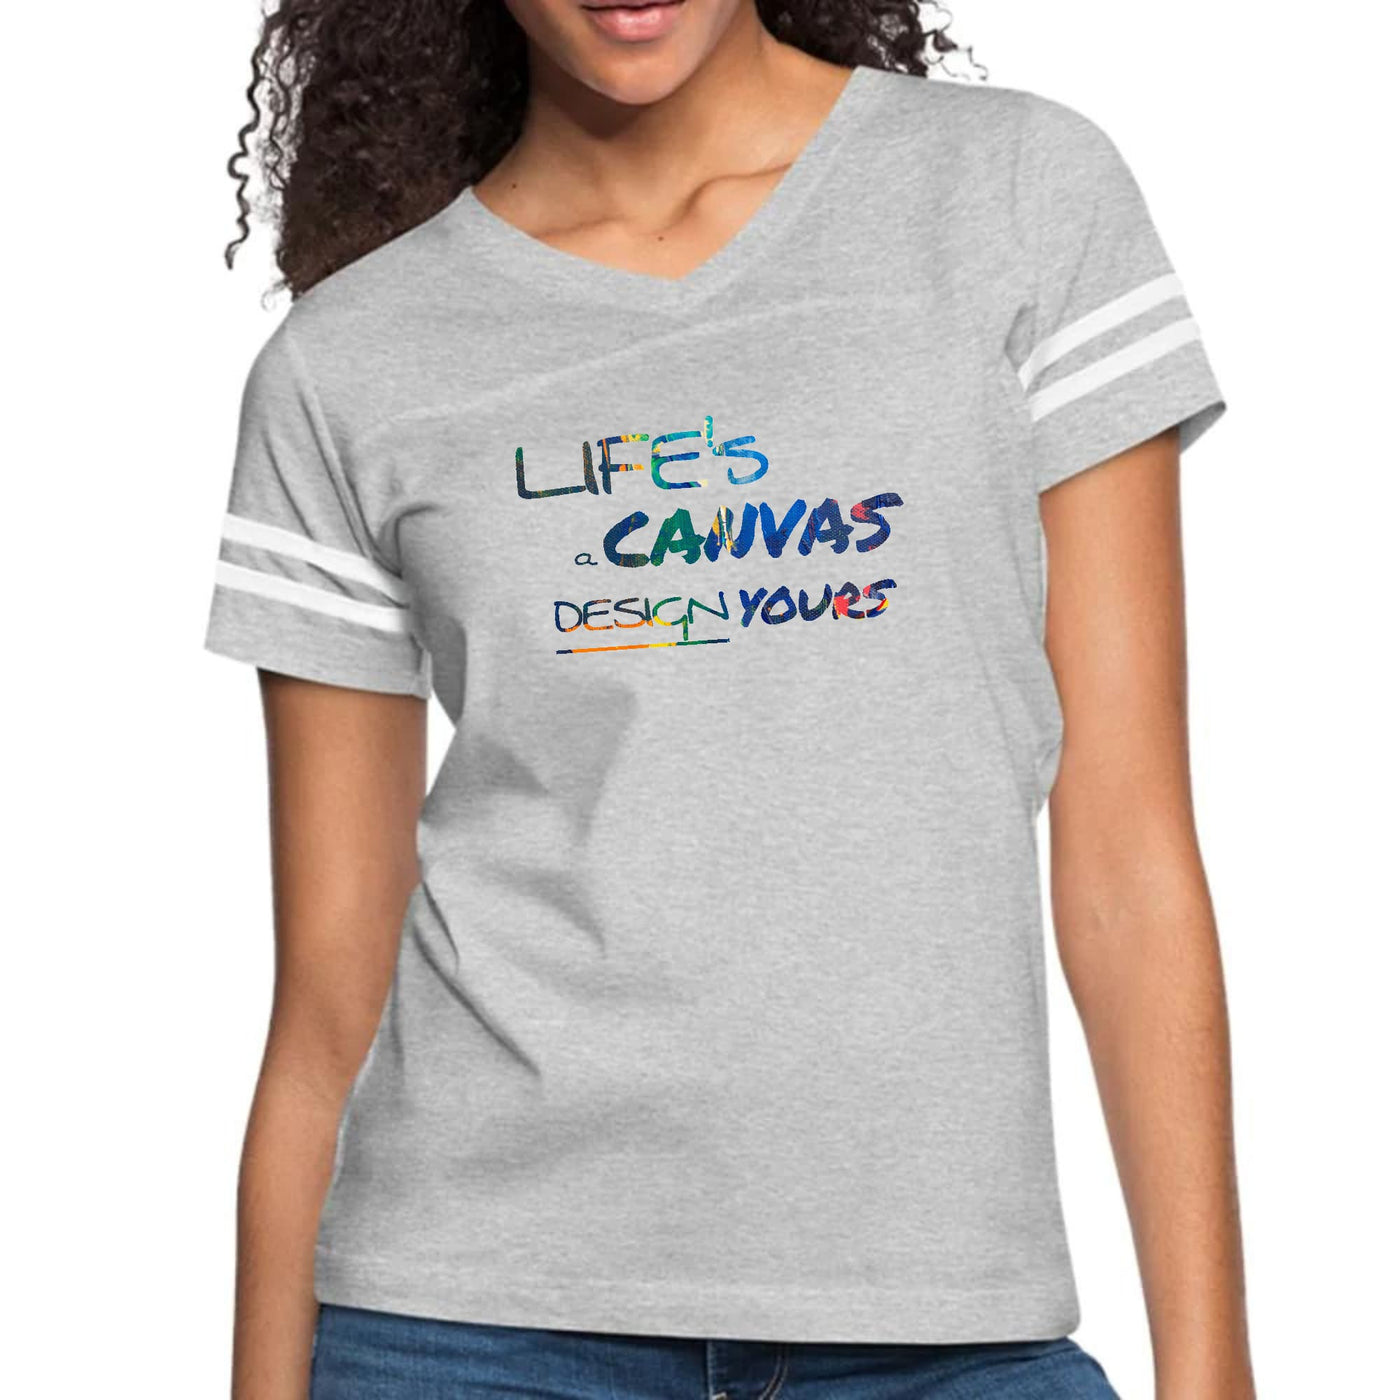 Womens Vintage Sport Graphic T-shirt Life’s a Canvas Design Yours - Womens